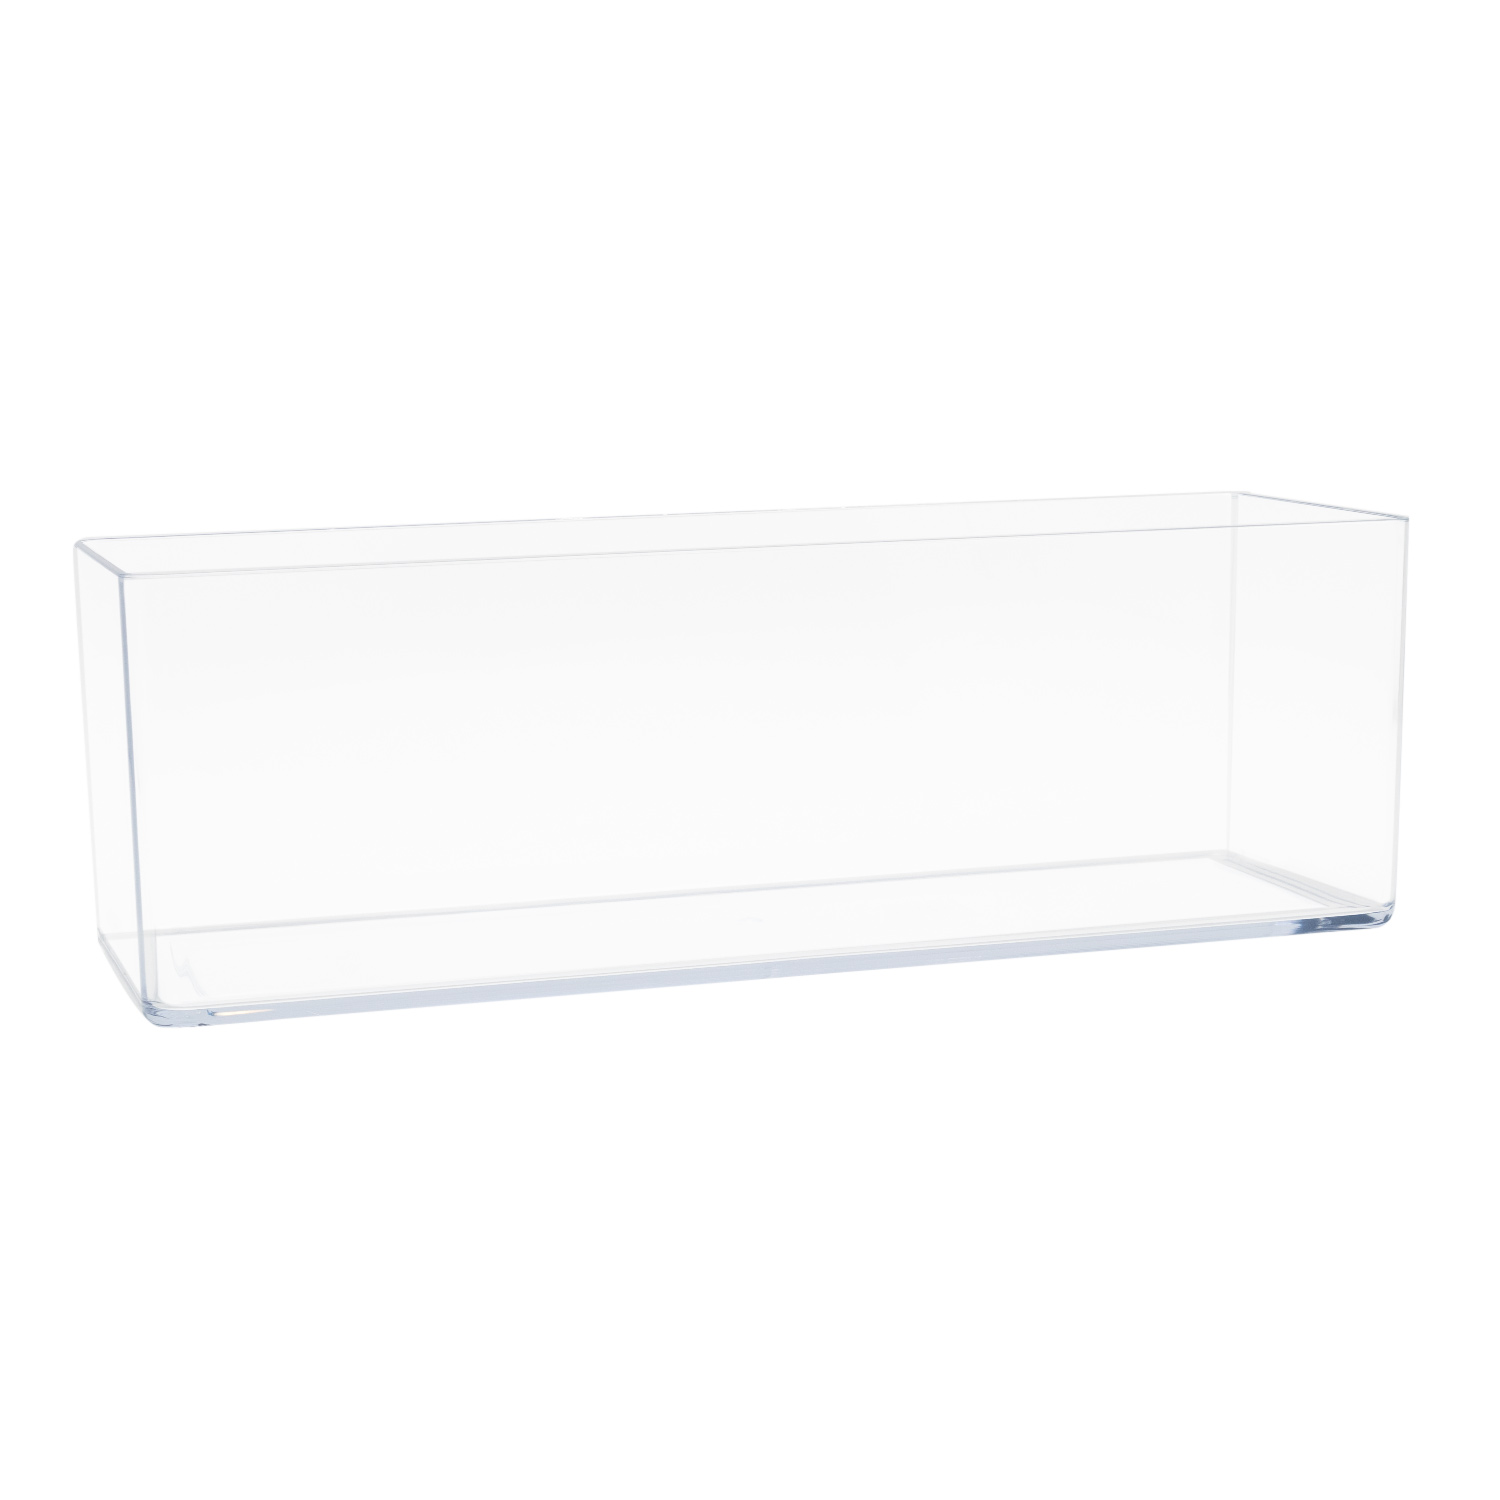 Acrylic Rectangle Flower Vase, 4 x 12, Low Square - Fisch Floral Supply